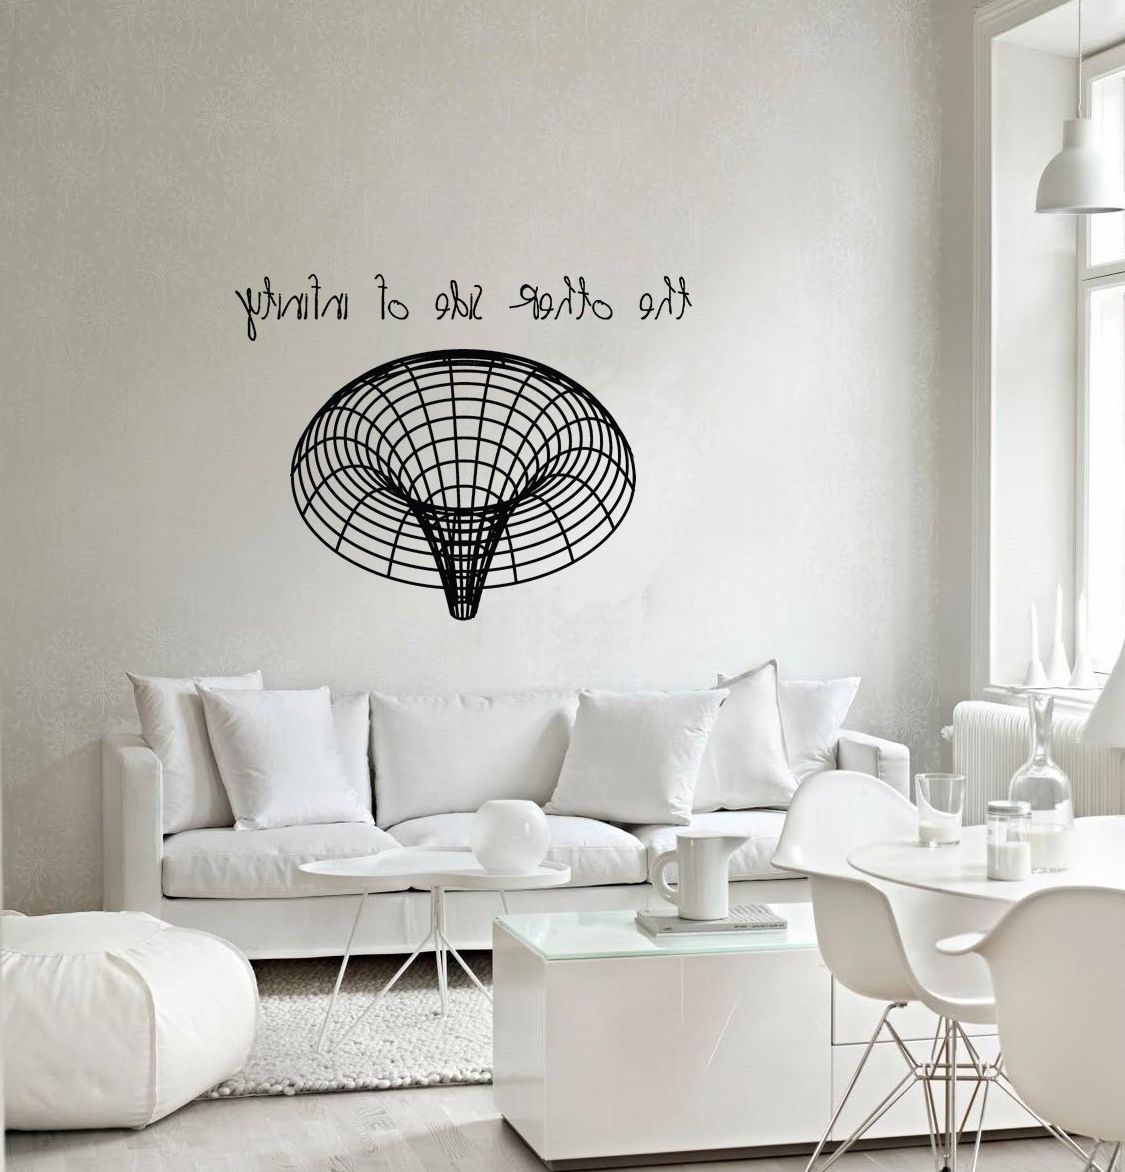 Wall Art Deco Decals For Current Science Art Astronomy – Black Hole Vinyl Wall Decal For Your Lab (View 5 of 15)